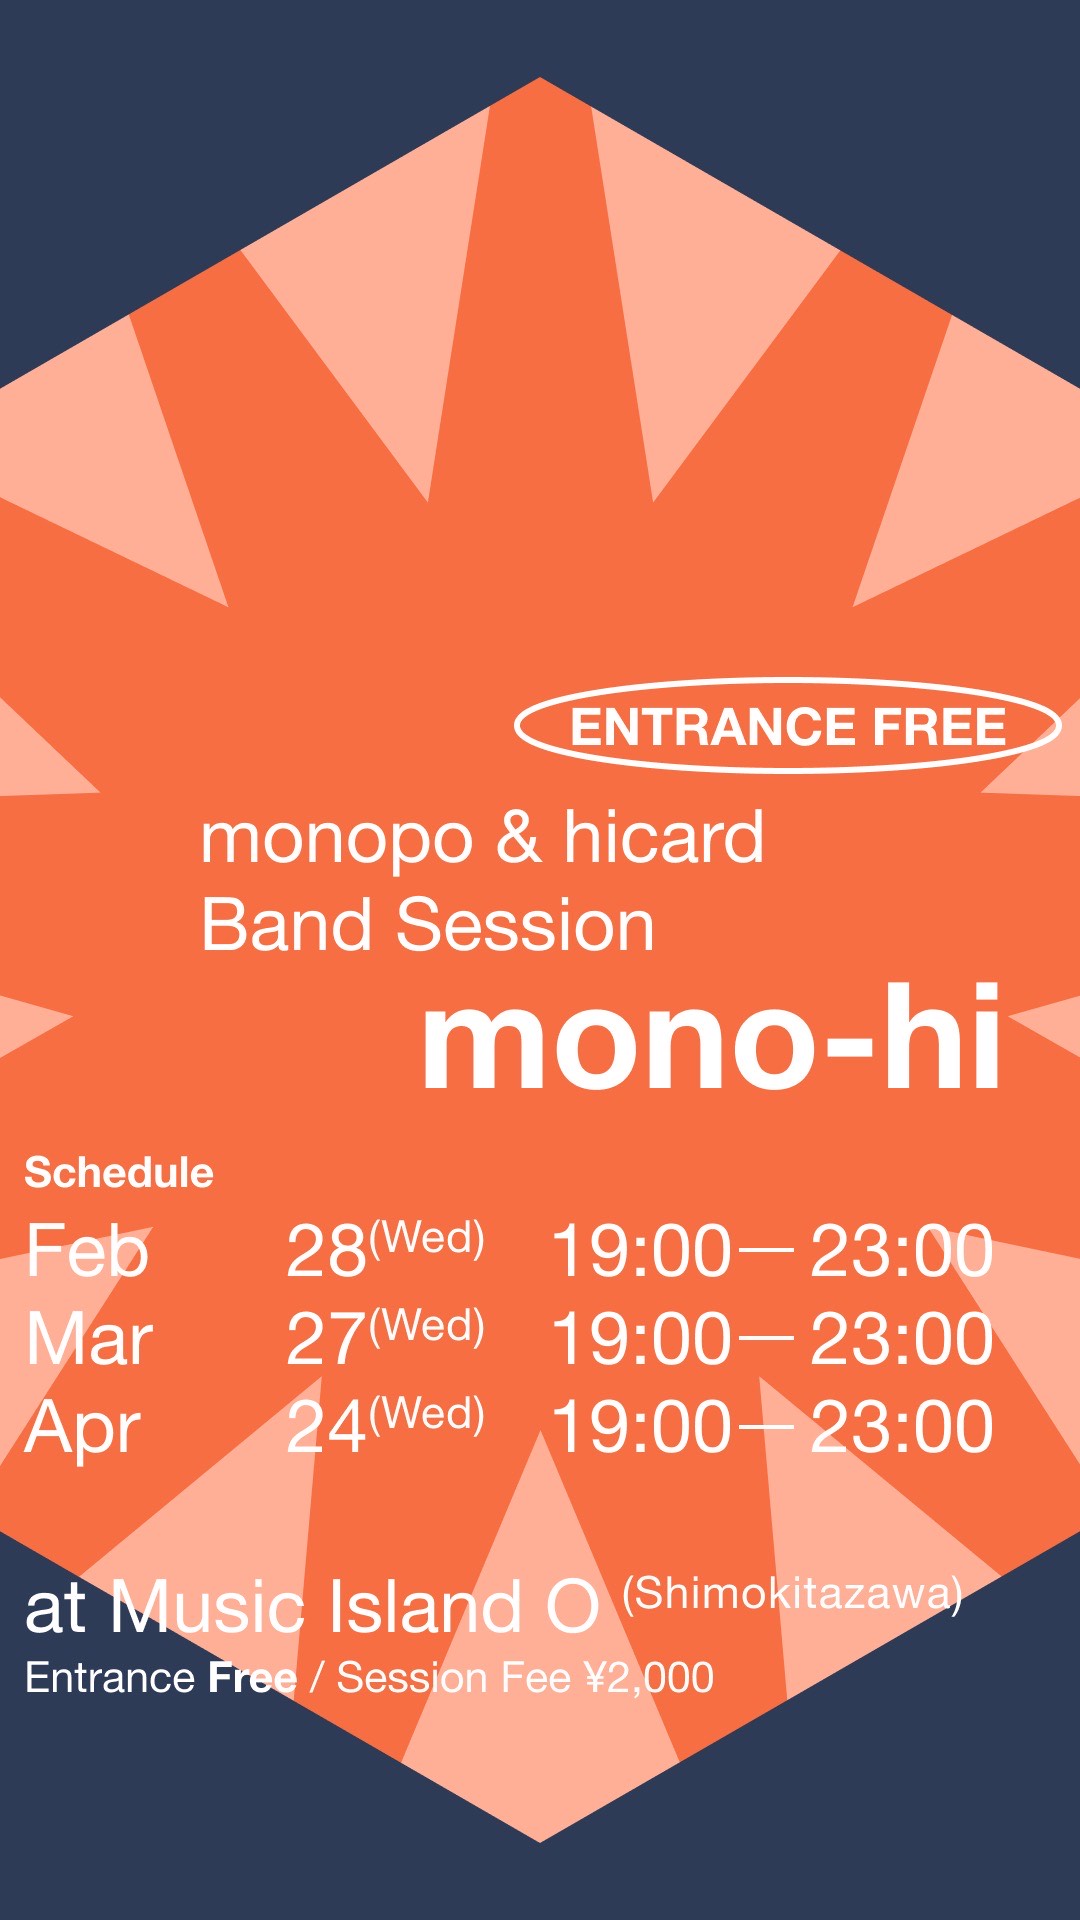 monopo & hicard Band Session